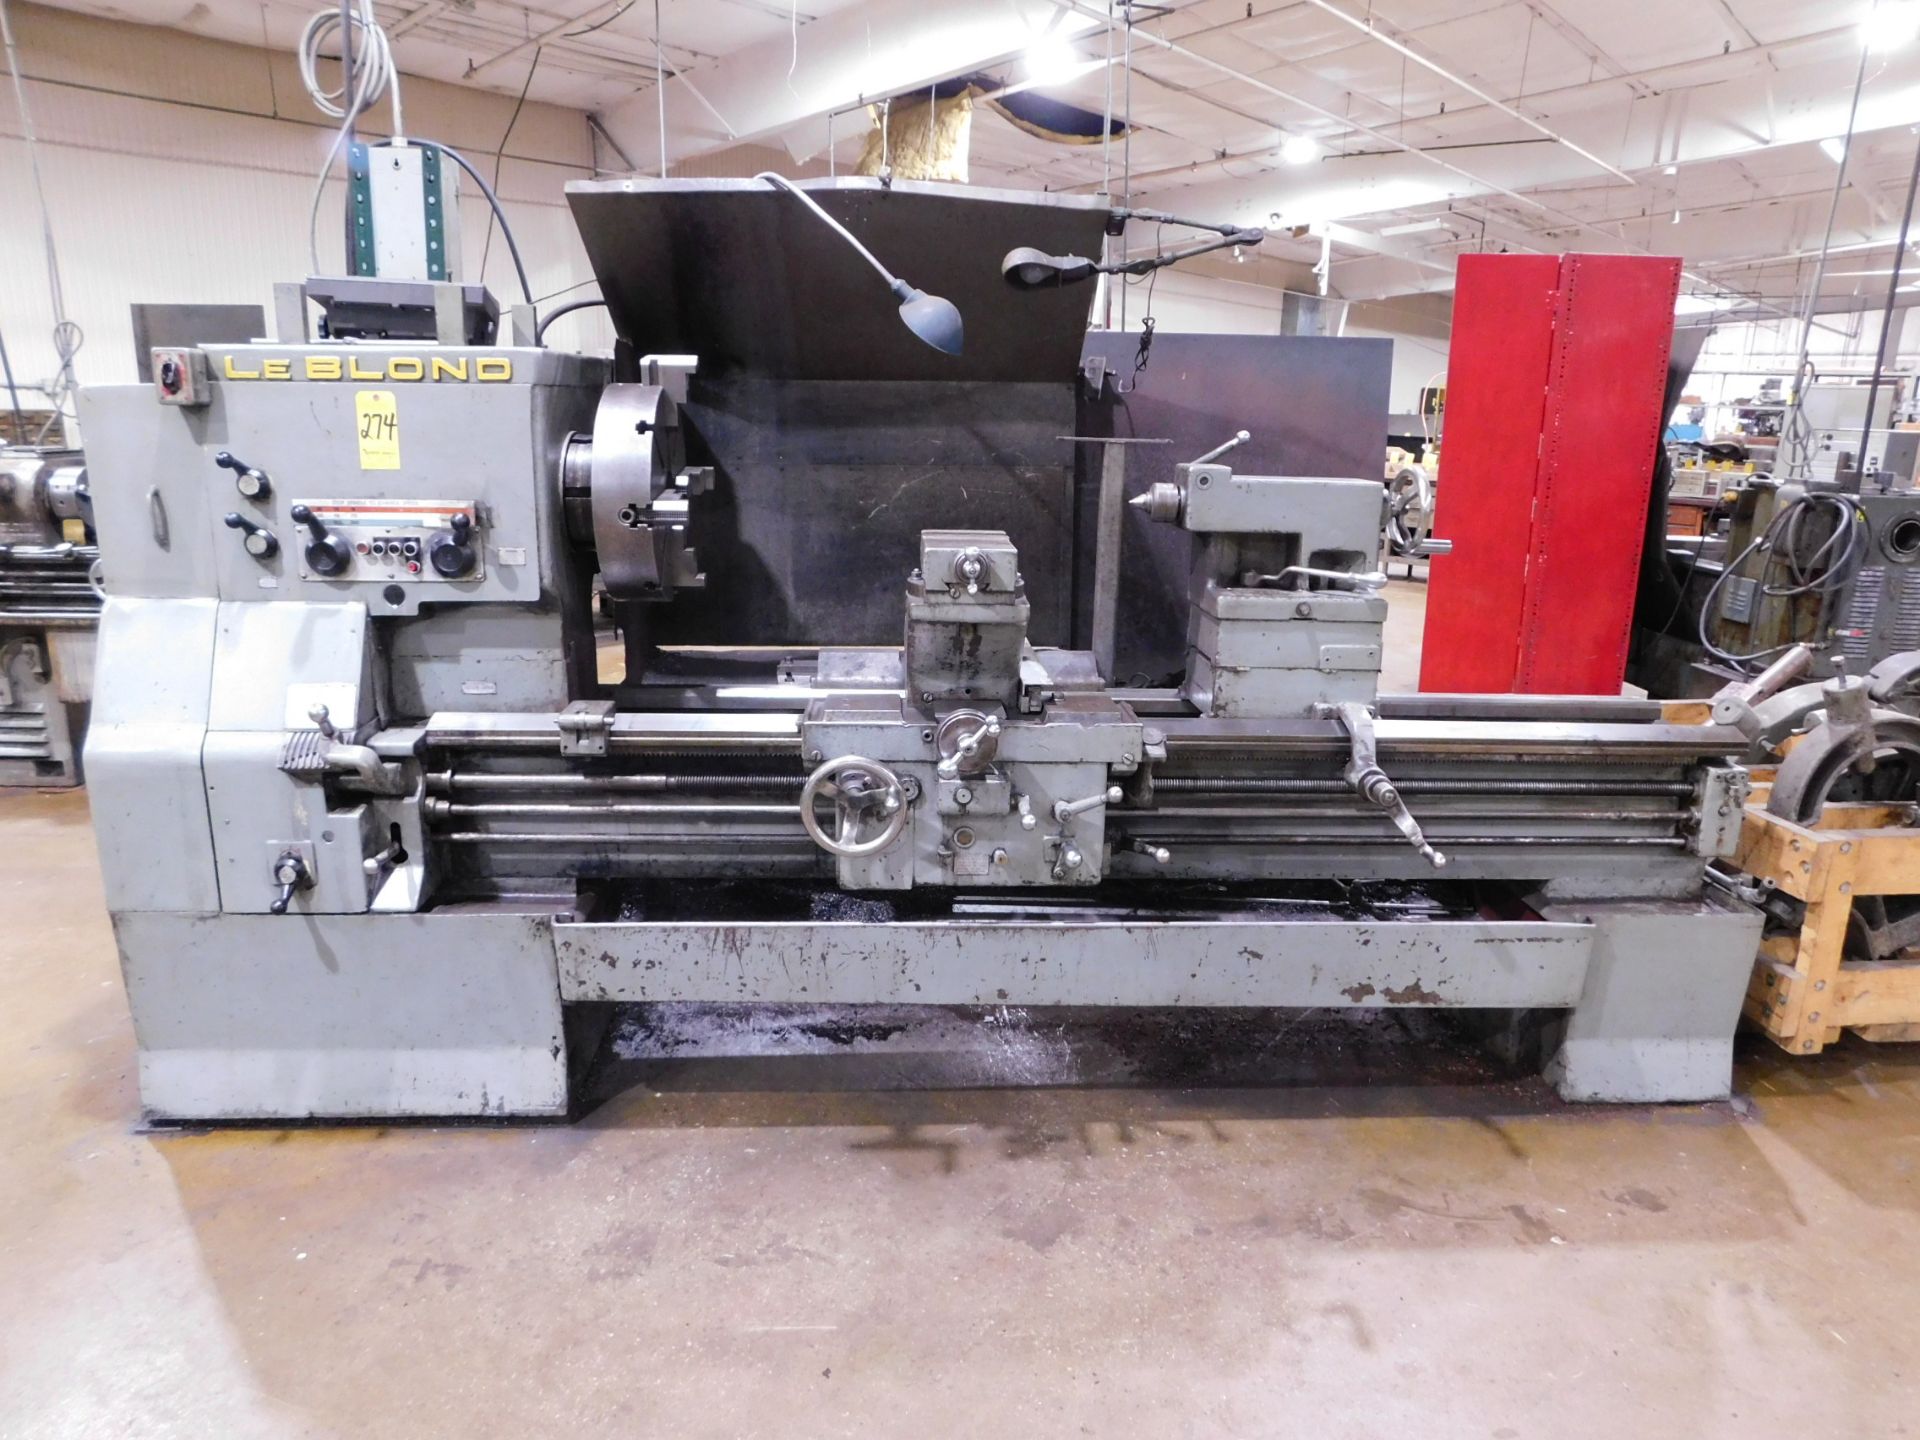 Leblond Raised Head Tool Room Lathe, 36" X 72", s/n 3H-974, 18" 4-Jaw Chuck, (2) Steady Rests, Taper - Image 2 of 11